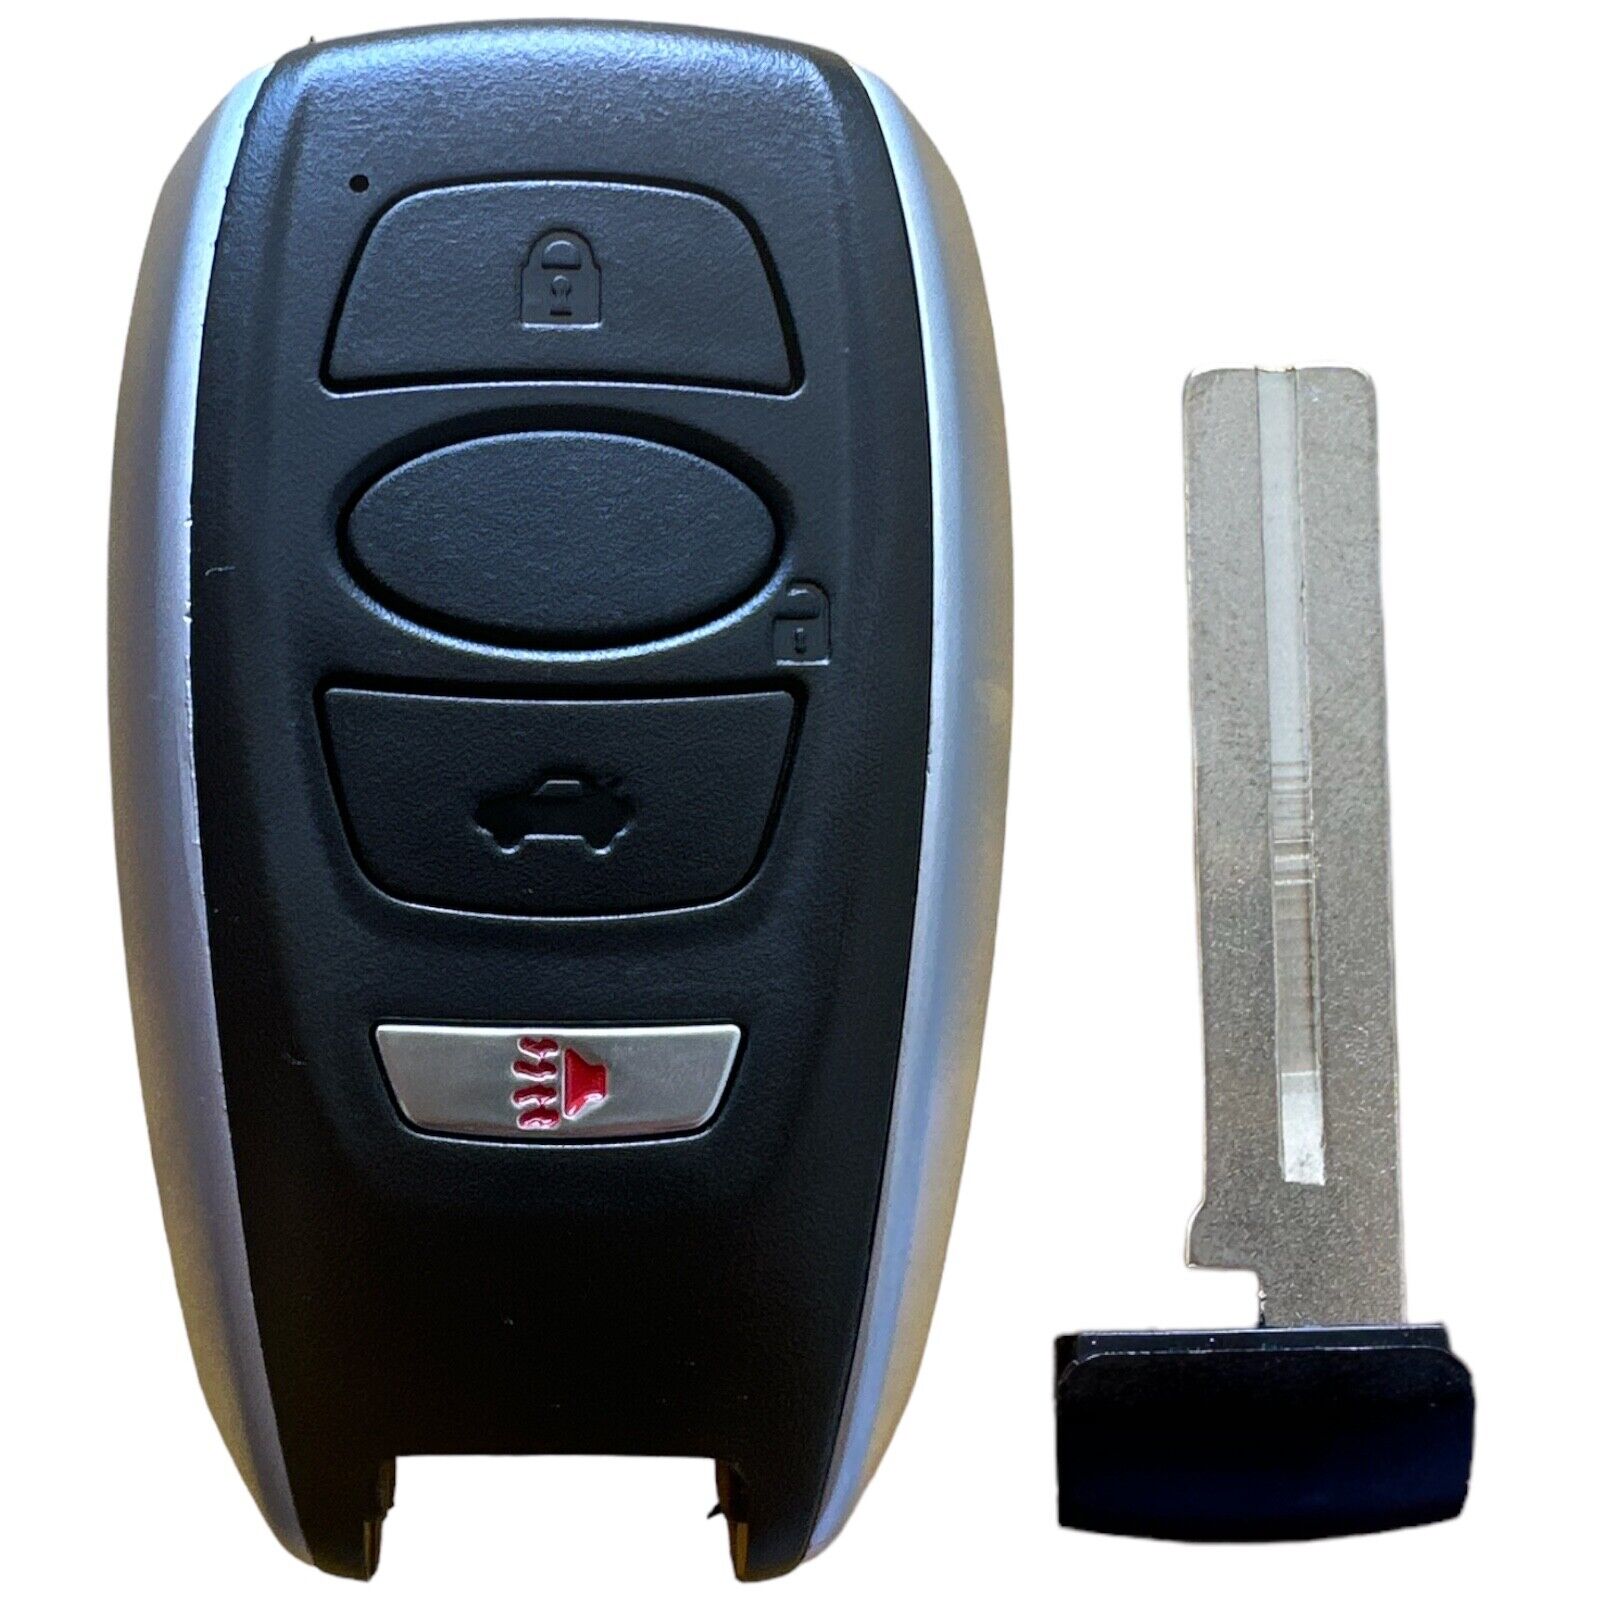 Replacement for Subaru 2014 -2020 Smart Prox Remote Key Fob 4B HYQ14AHC